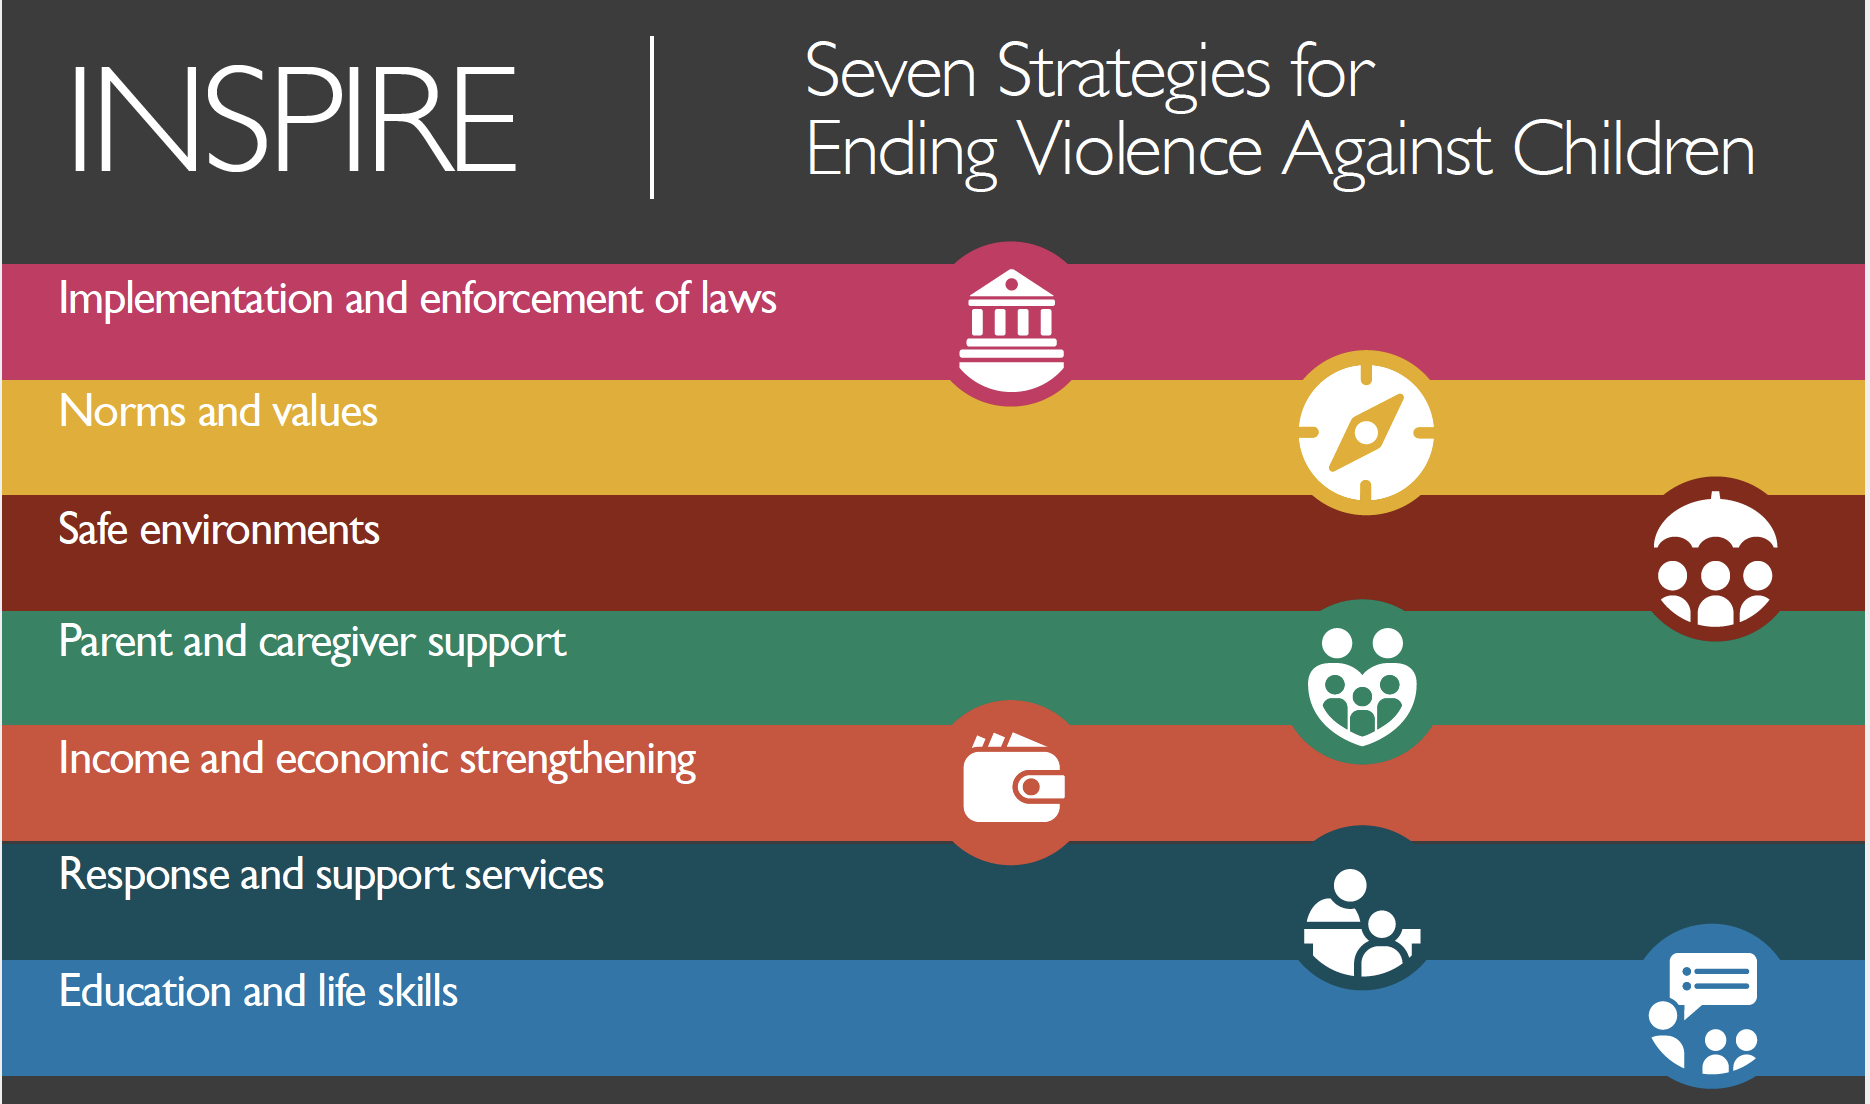 INSPIRE Strategy to End Violence Against Children_WHO